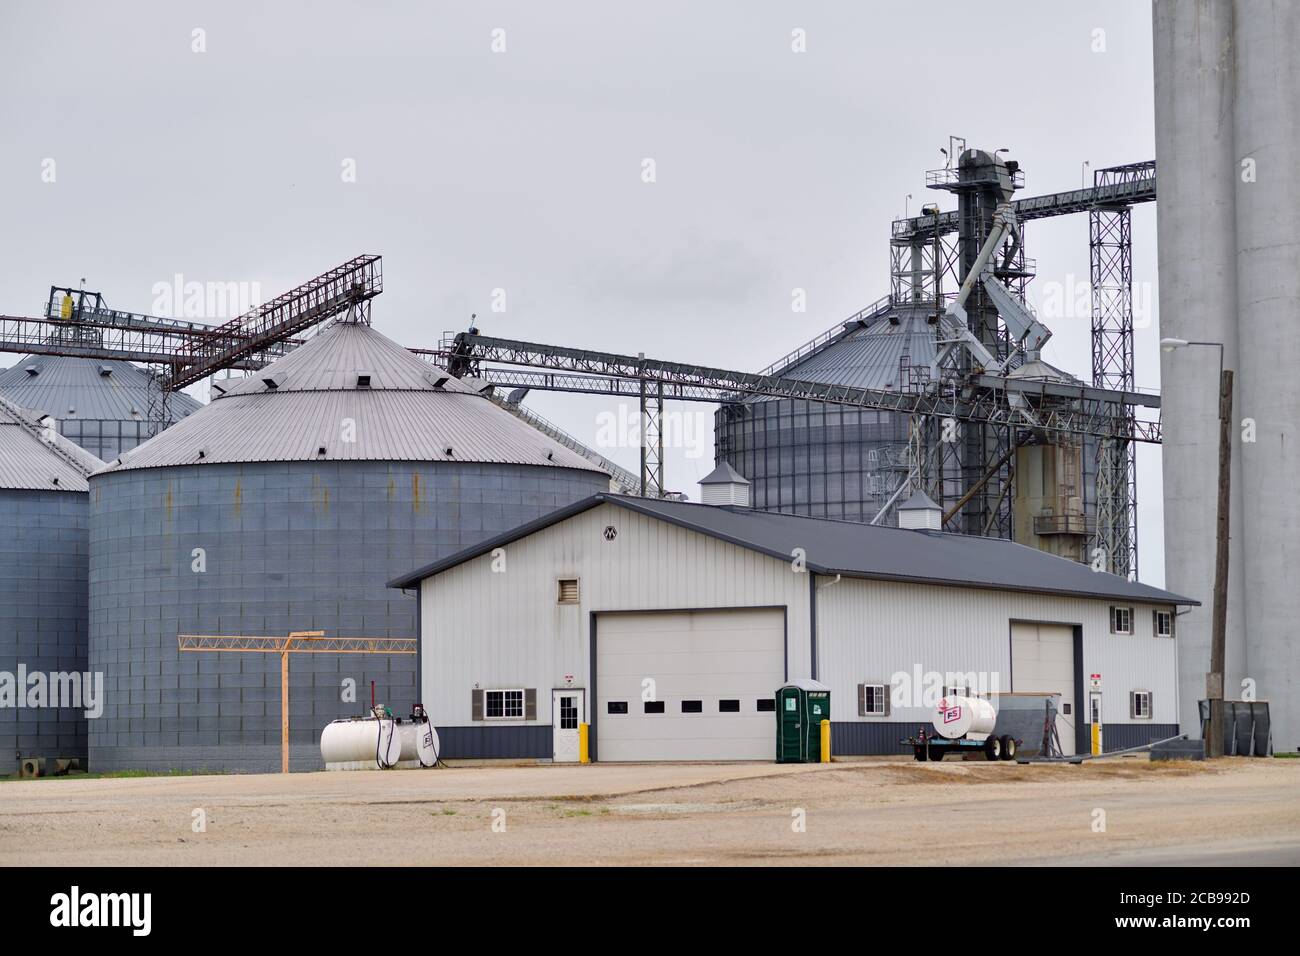 Ransom, Illinois, USA. Large grain elevators and agricultural cooperative in a small north central Illinois community. Stock Photo